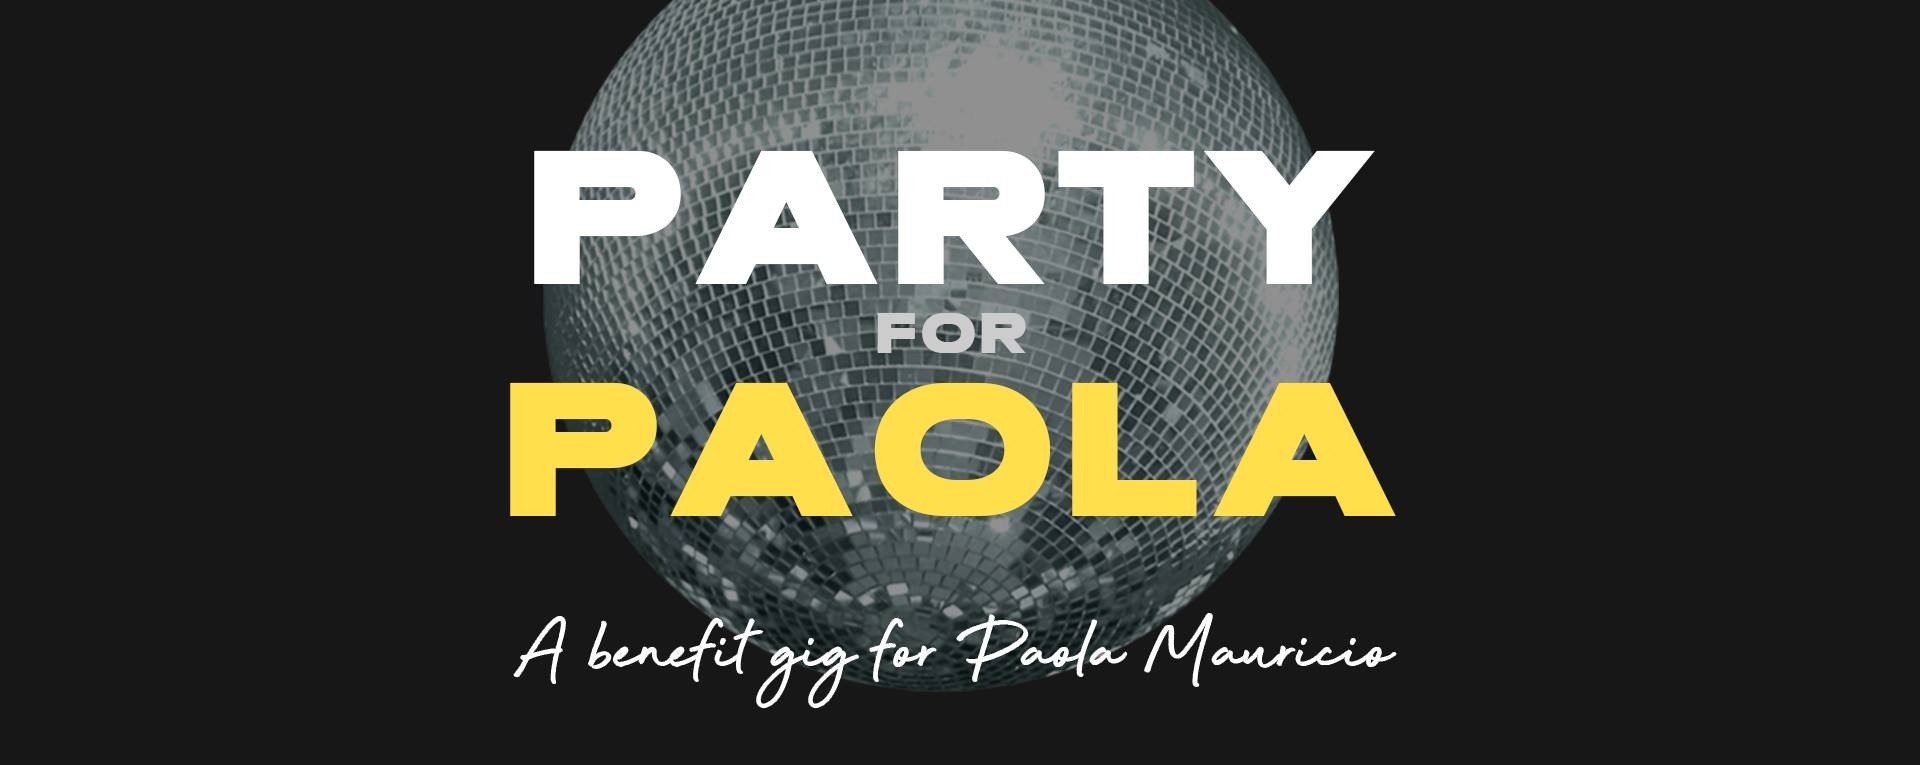 Party for Paola: A Benefit Gig